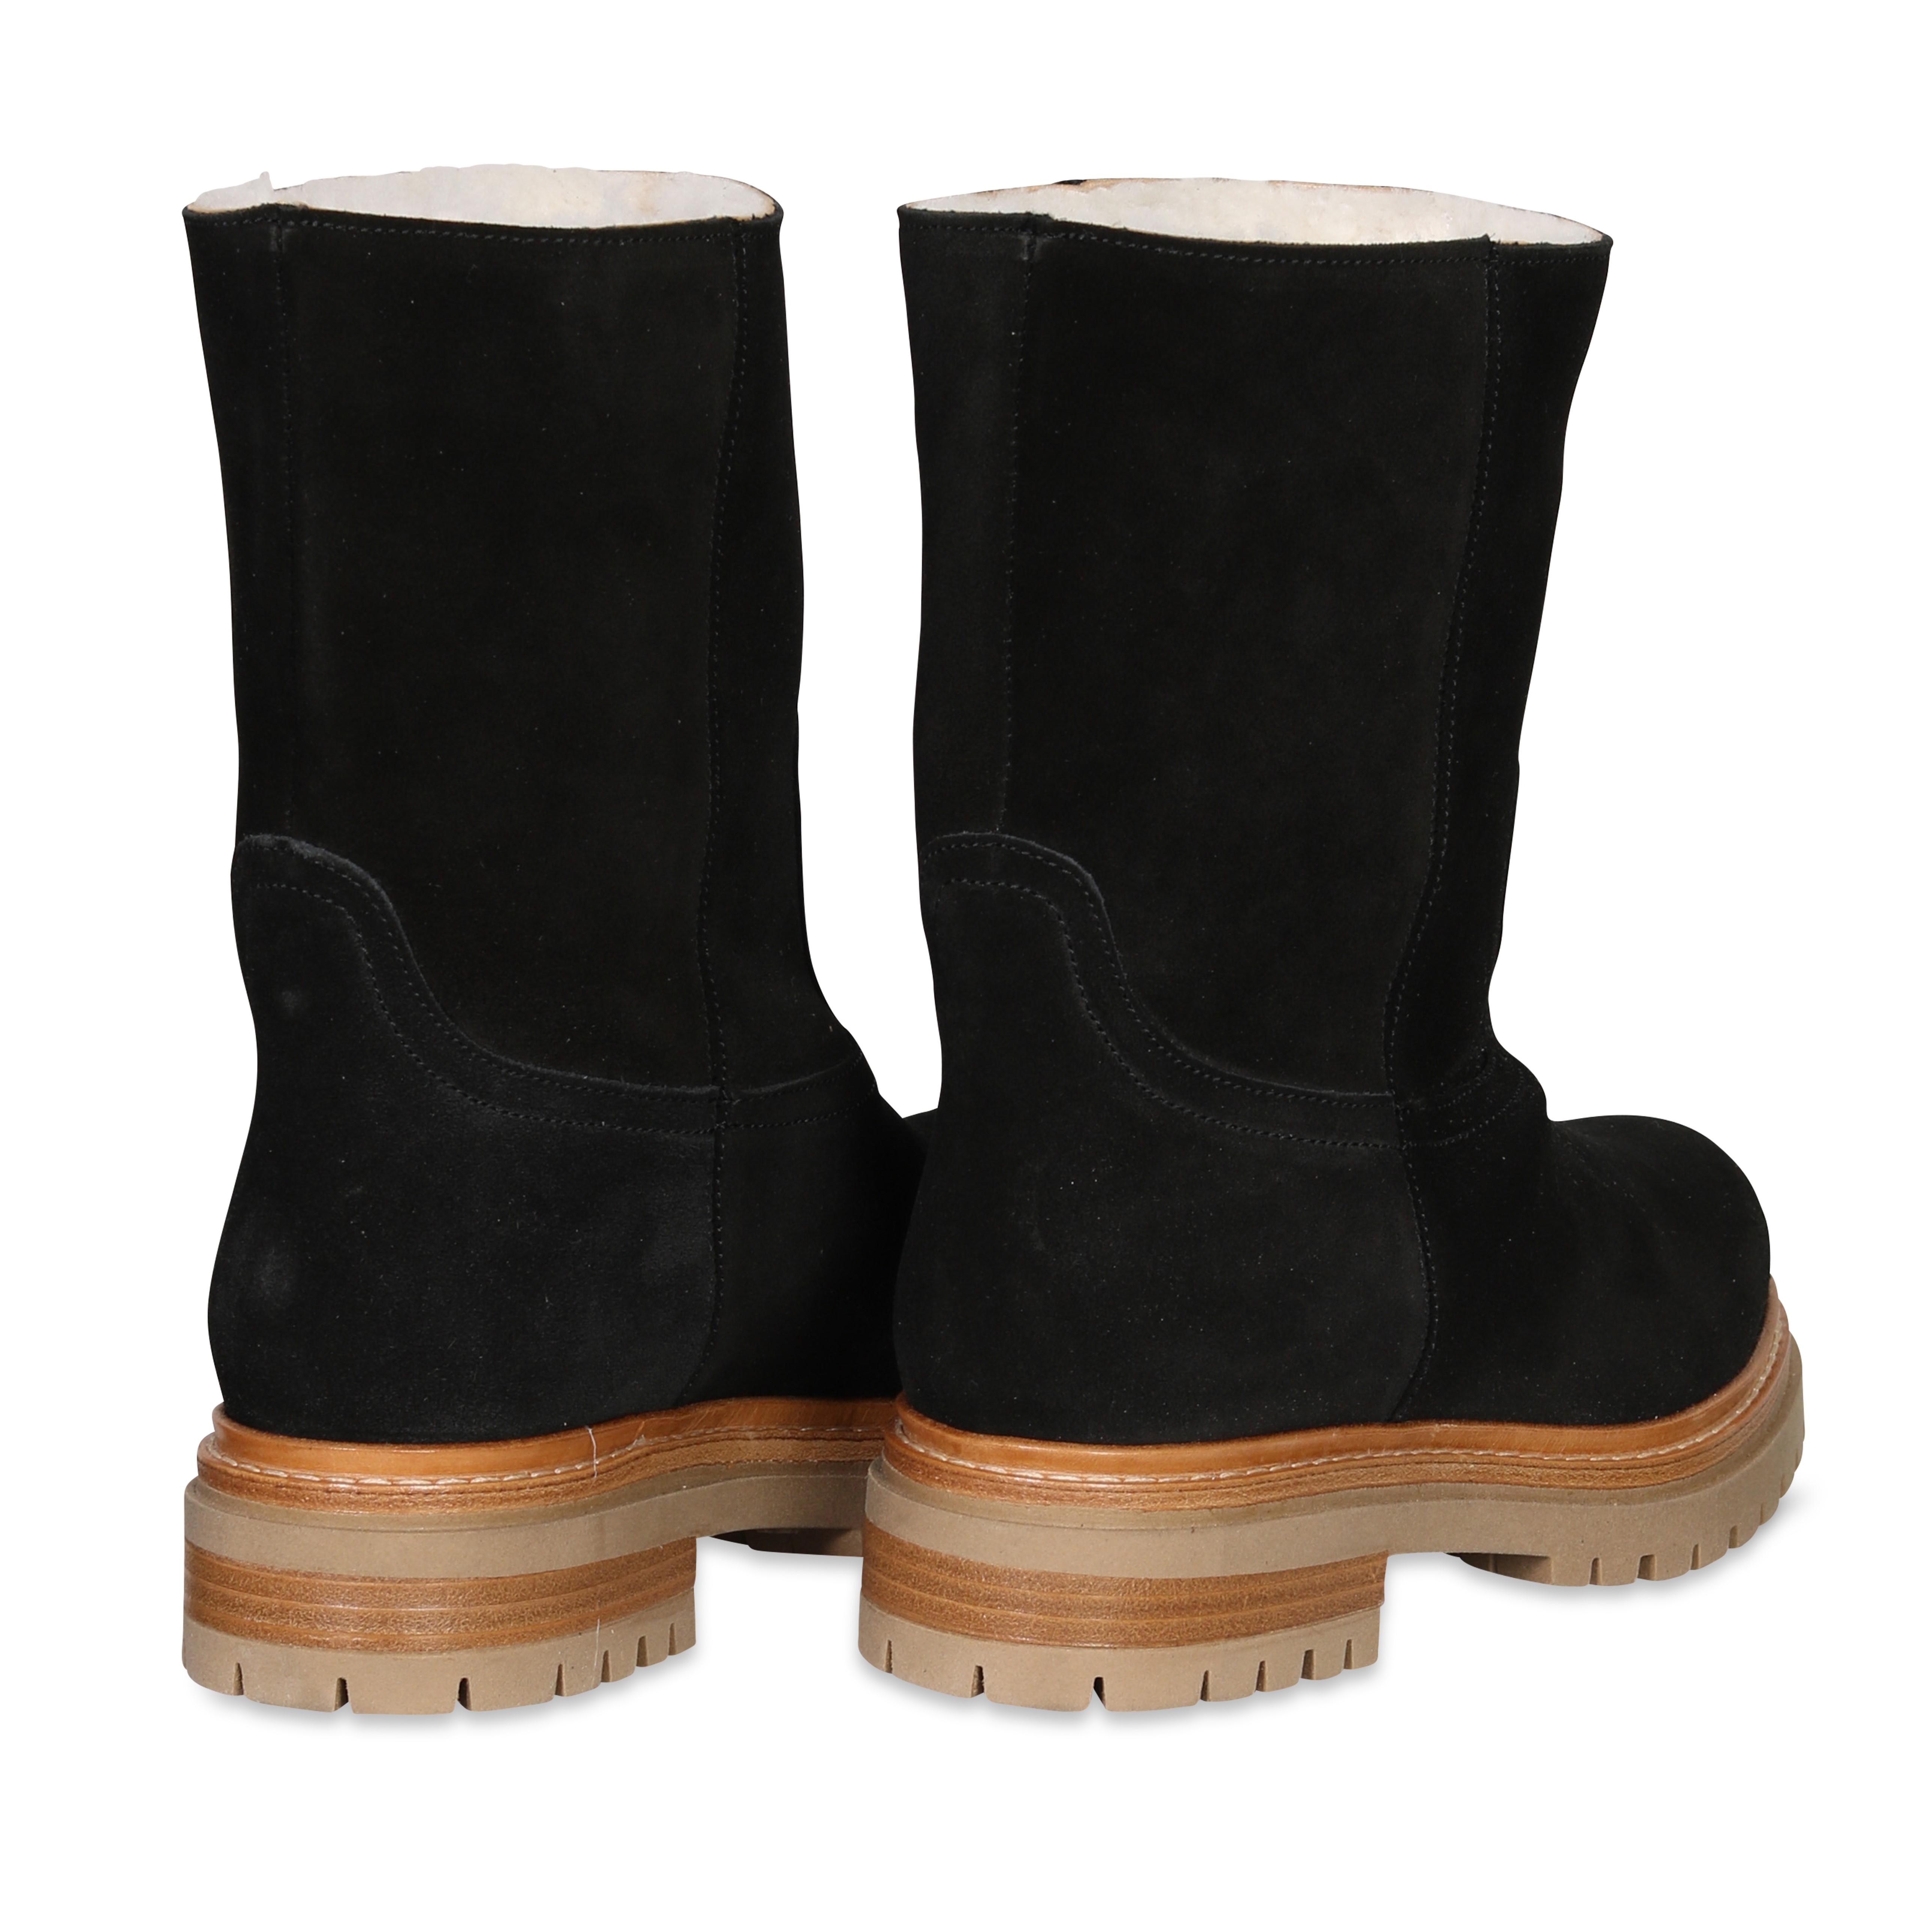 Ennequadro Boots in Black Suede/Fur